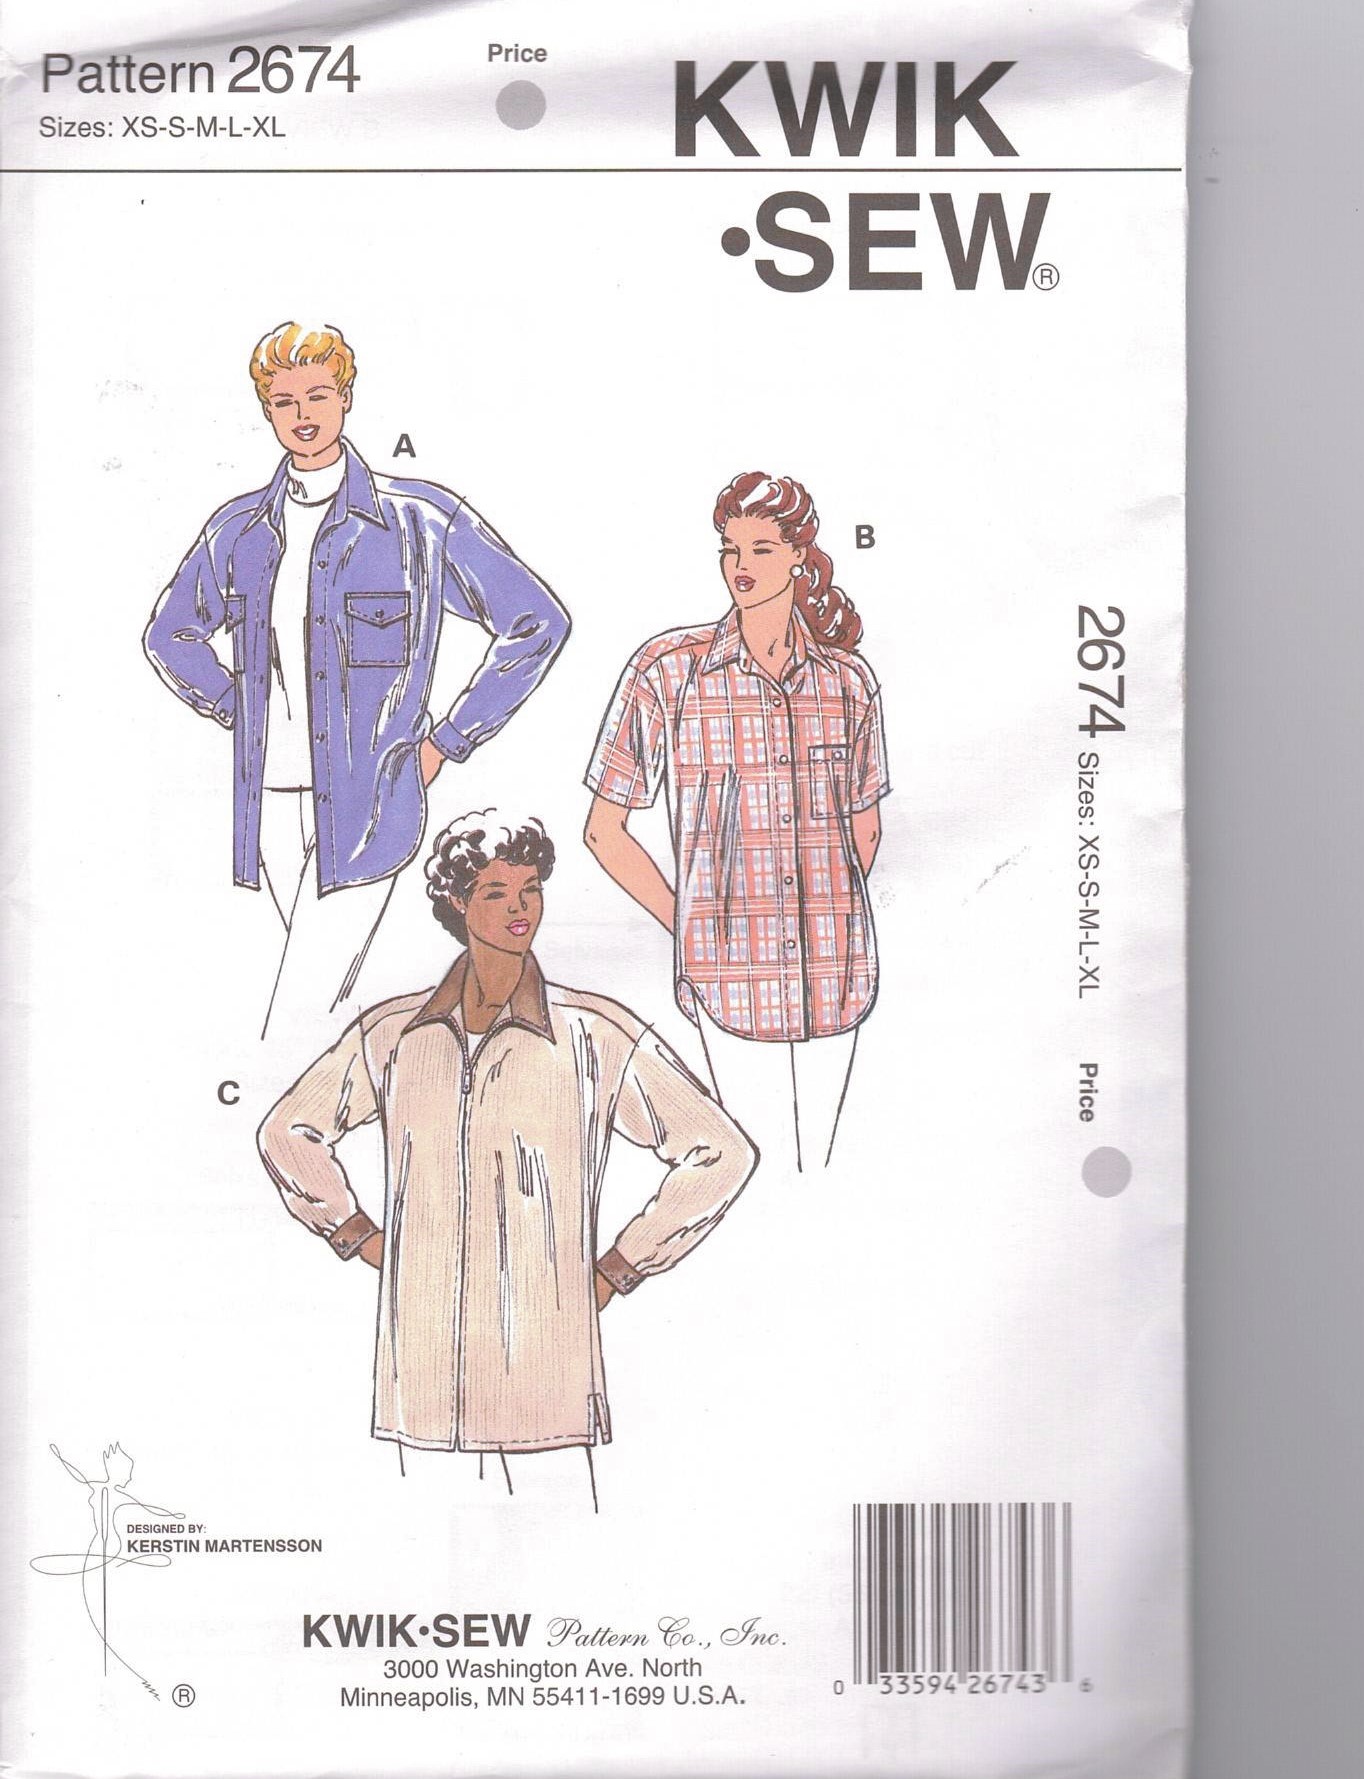 Kwik Sew Pattern 2674 Loose Fitting Shirts in three views for